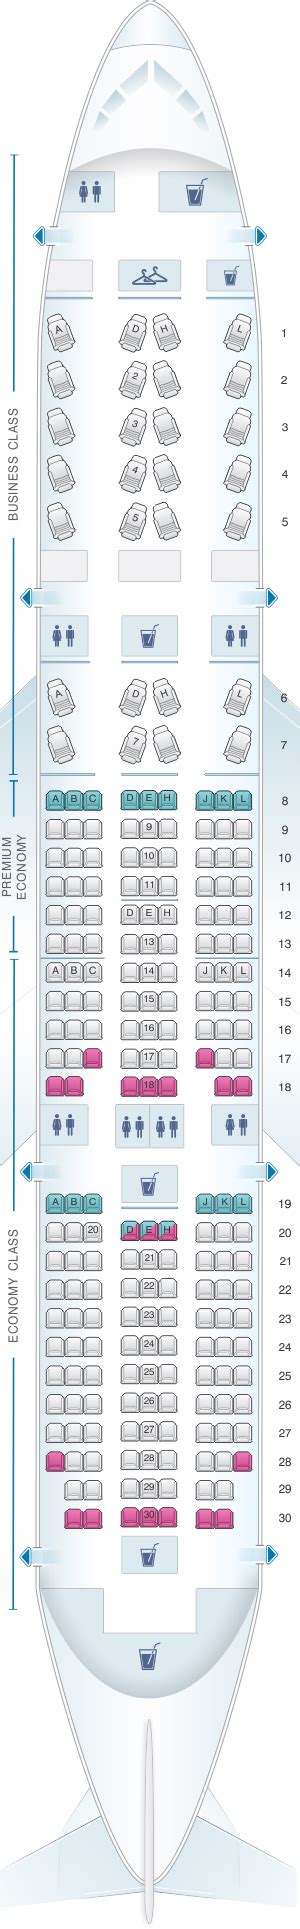 Seat Chart For American Airlines